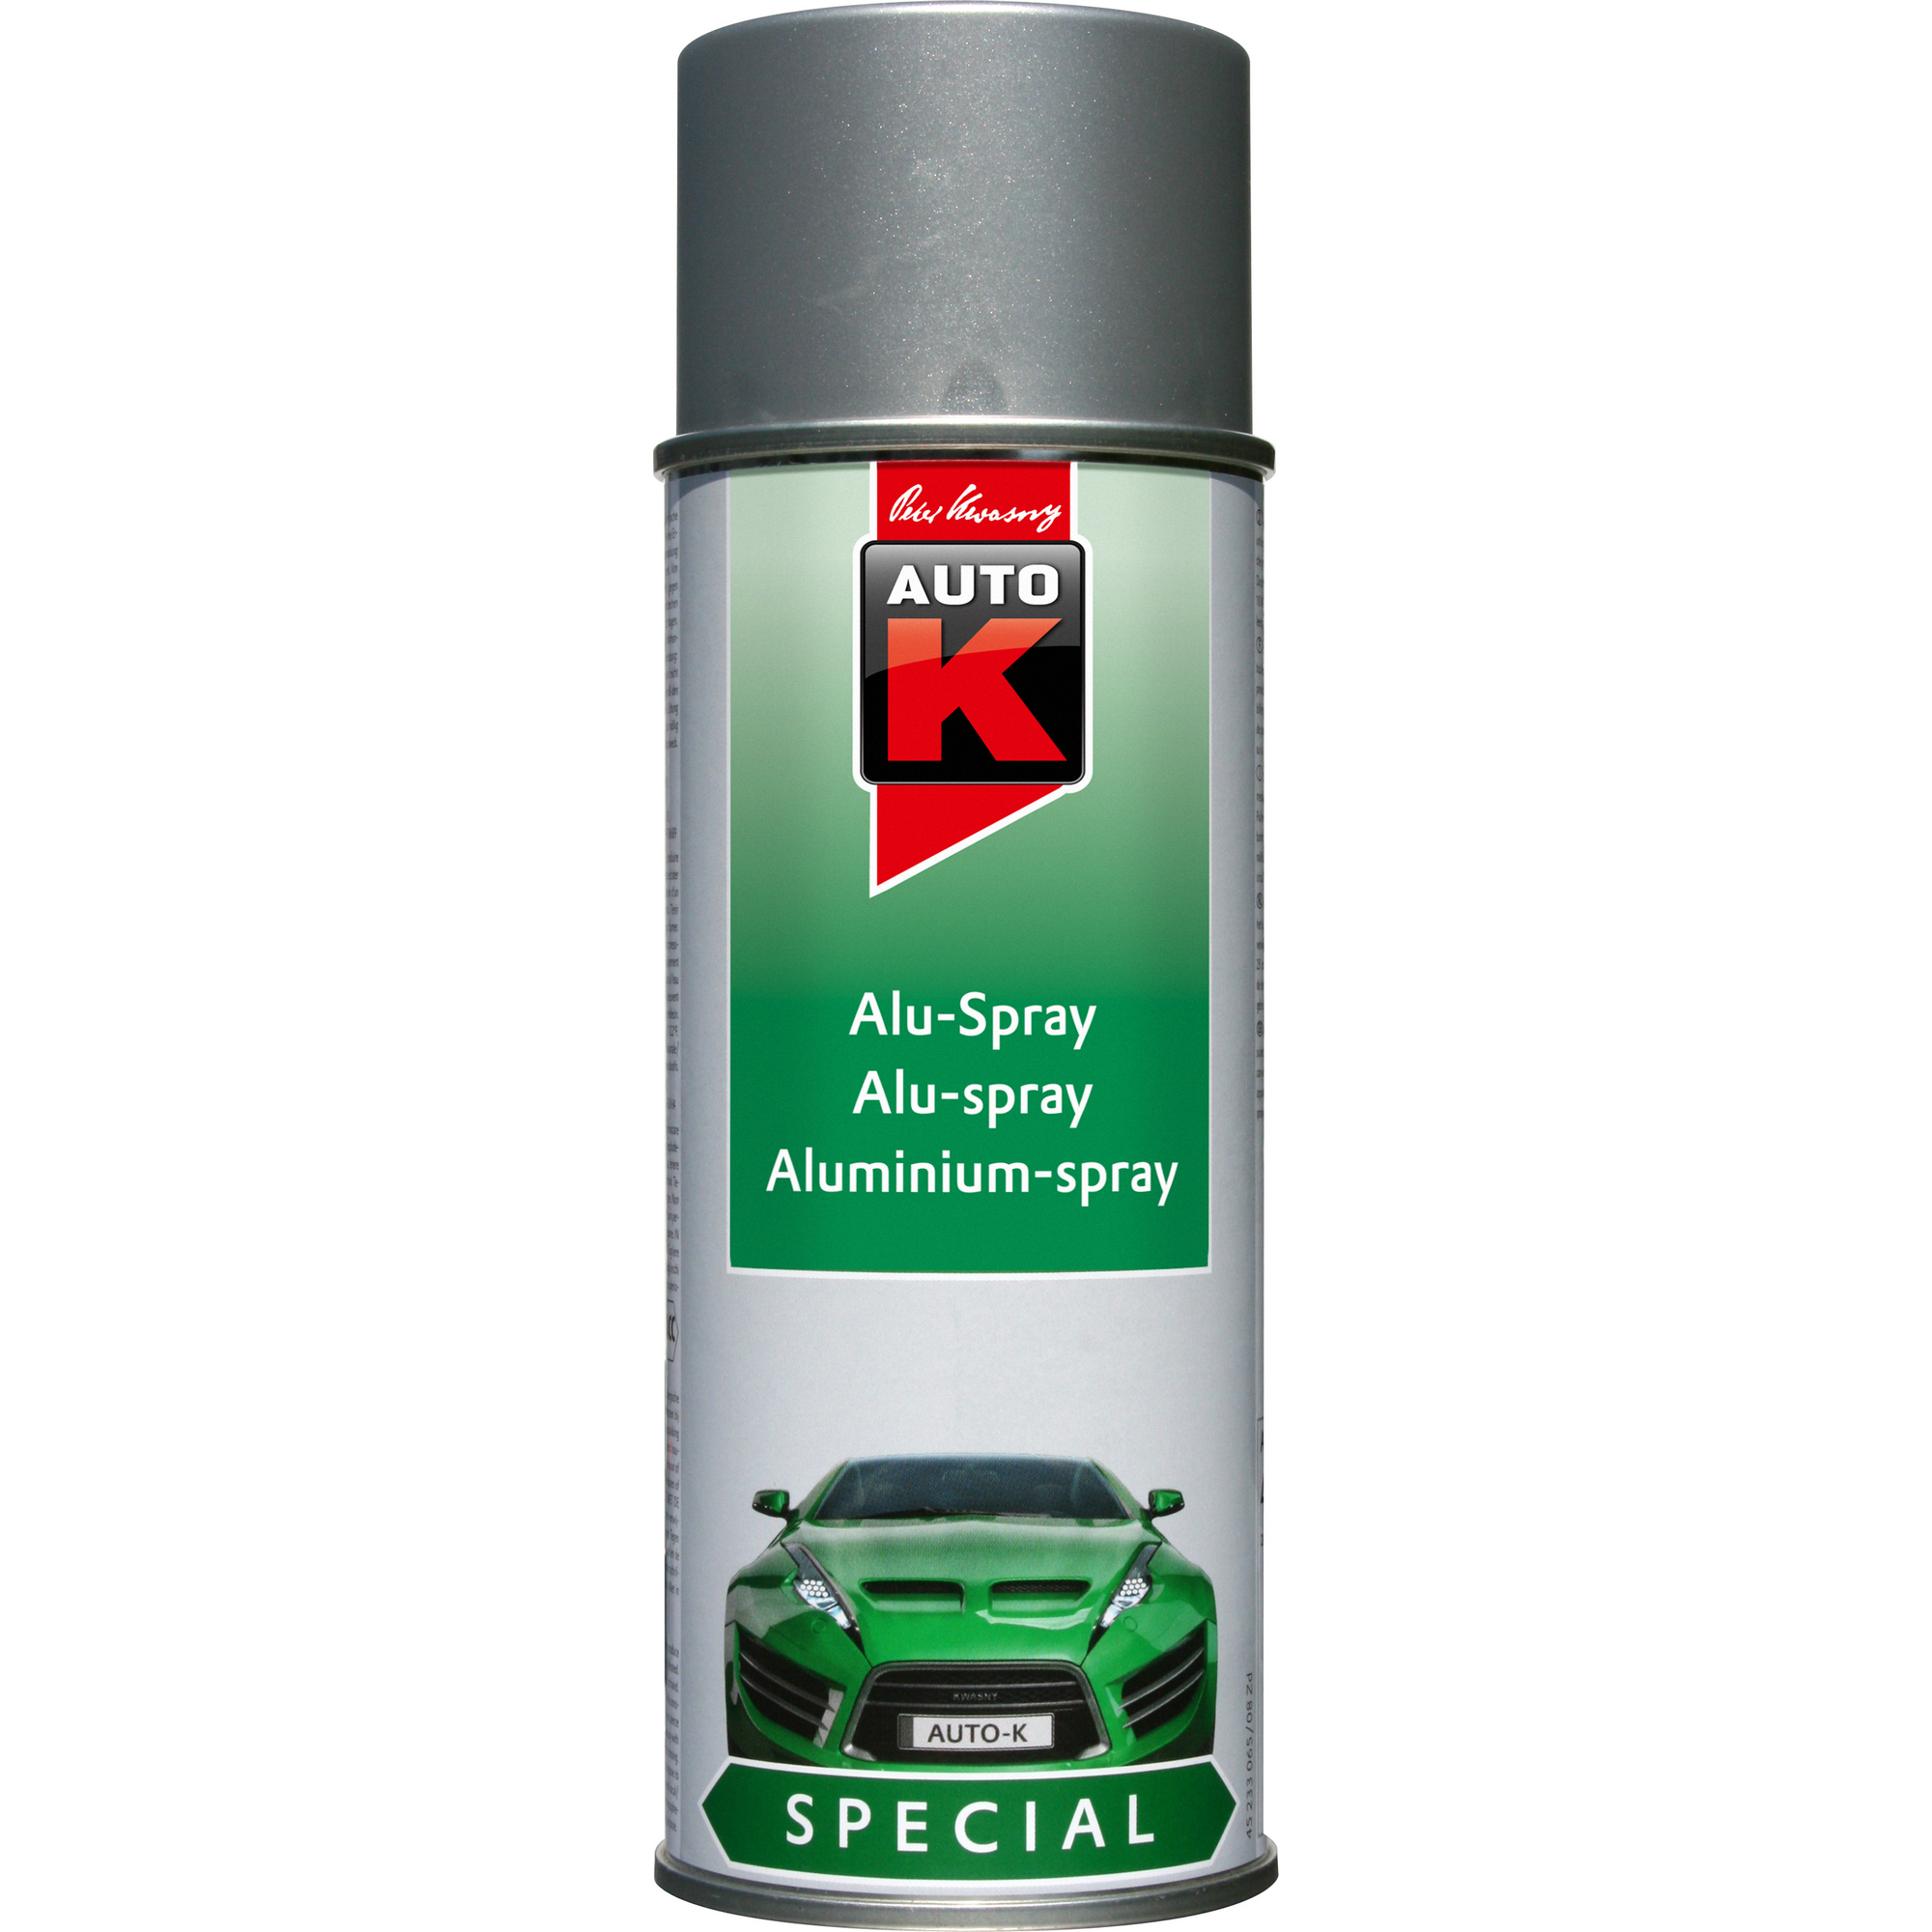 Auto-K Alu-Spray silber 400 ml + product picture